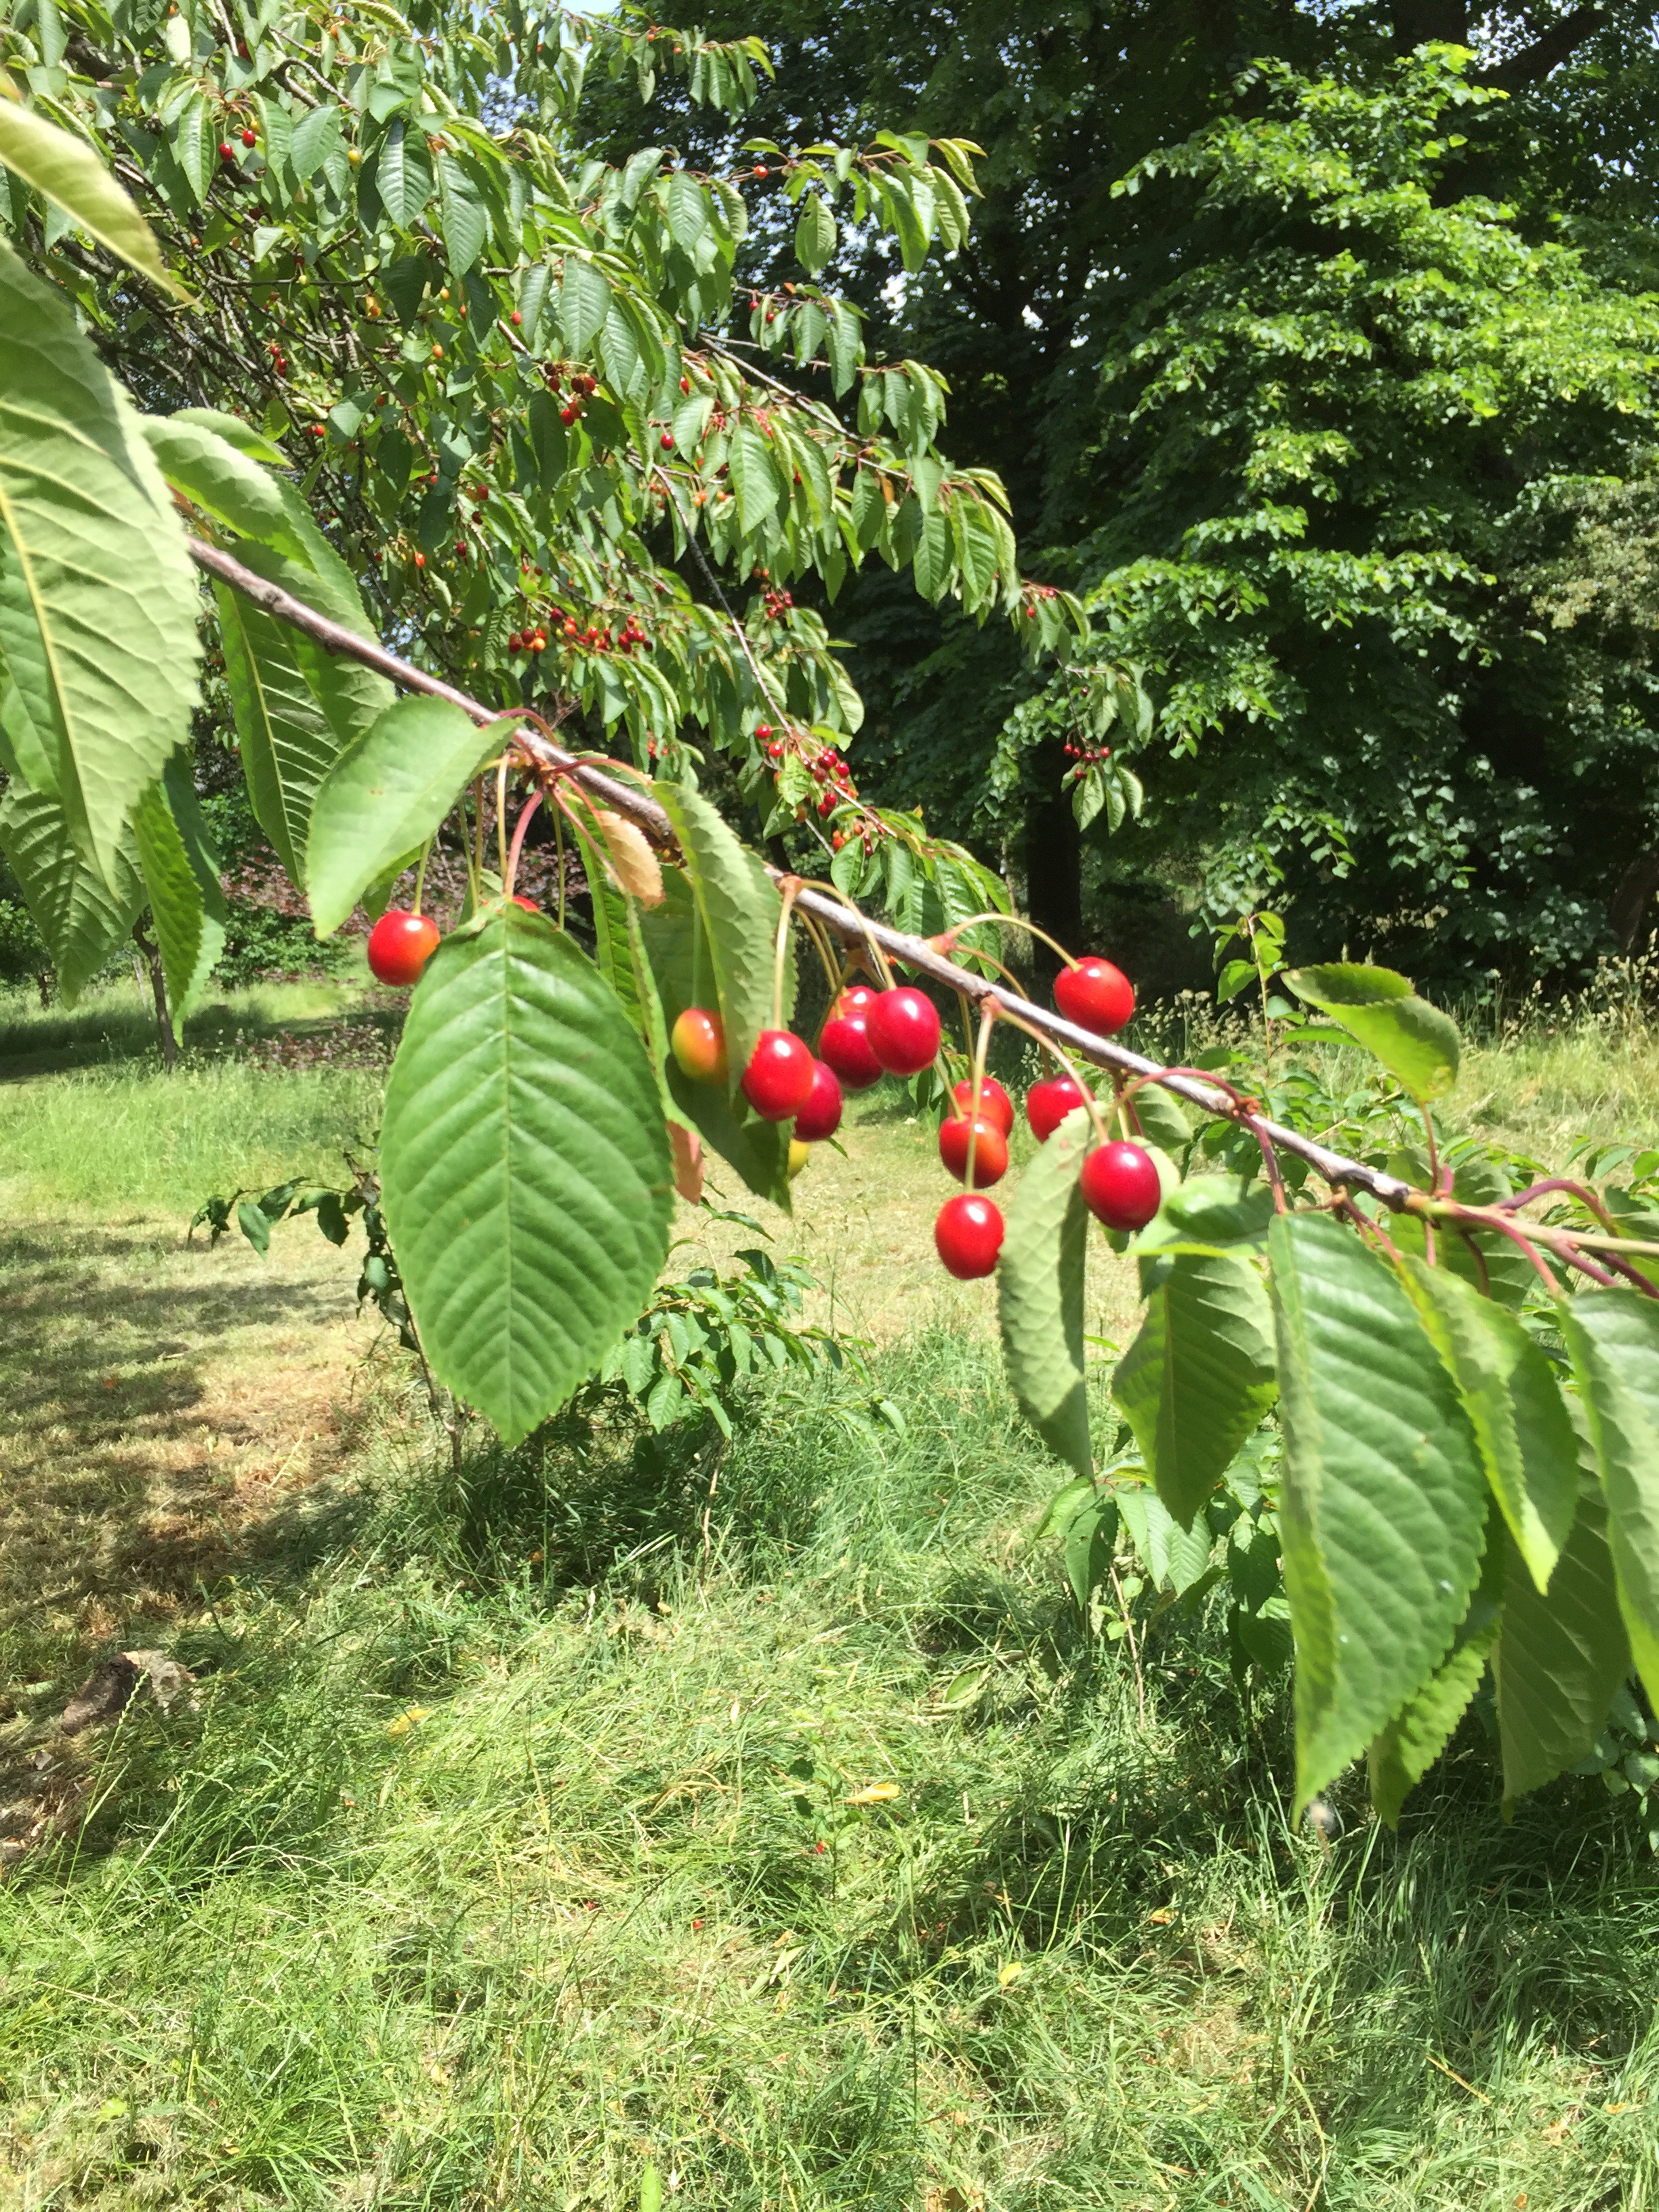 Are Wild Cherries Edible or Poisonous?